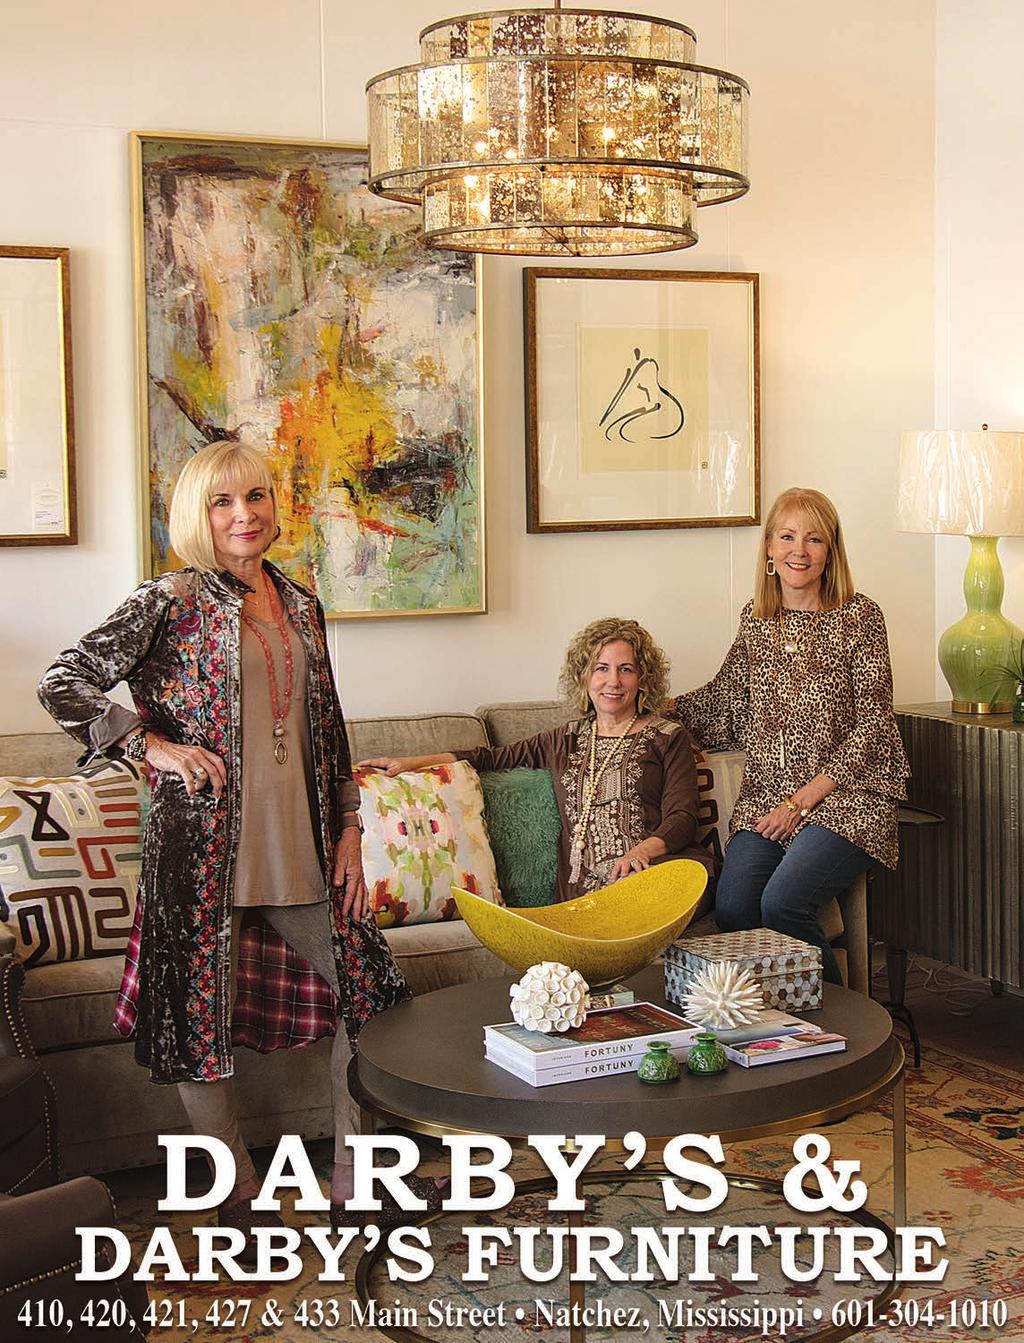 Darby s & Darby s Furniture